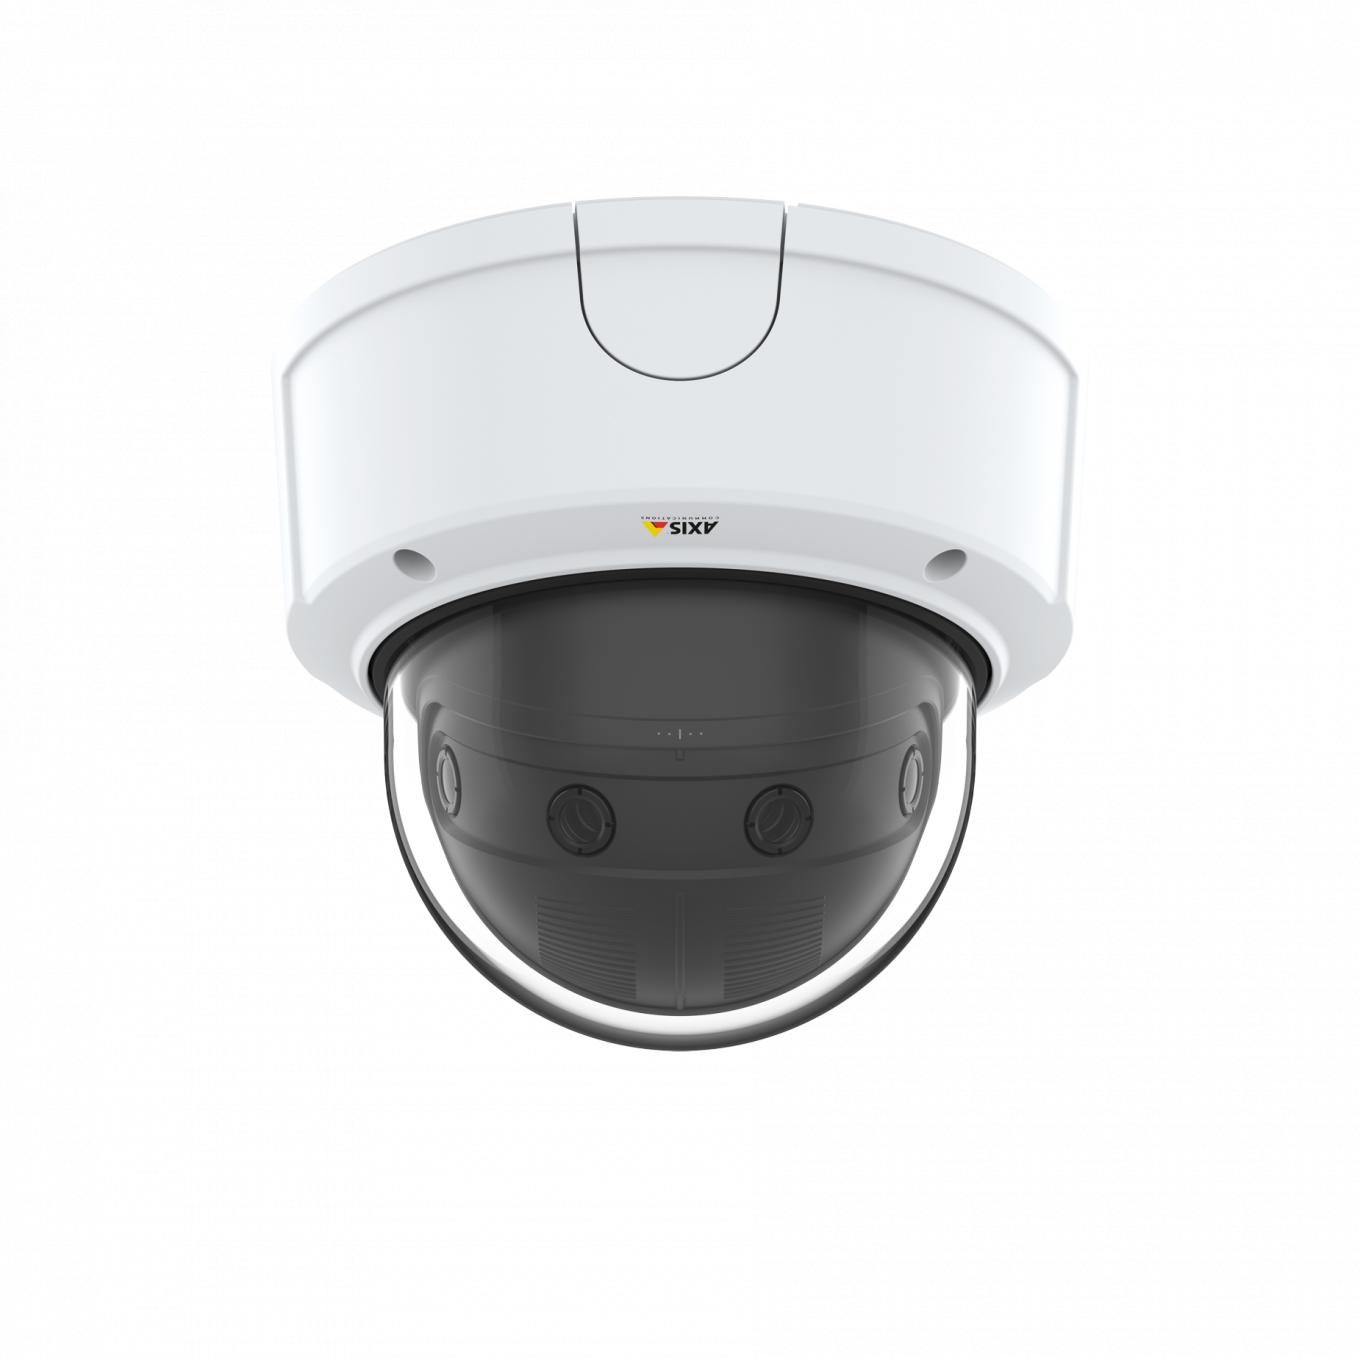 AXIS P3807-PVE  is a panoramic camera for seamless, 180° coverage